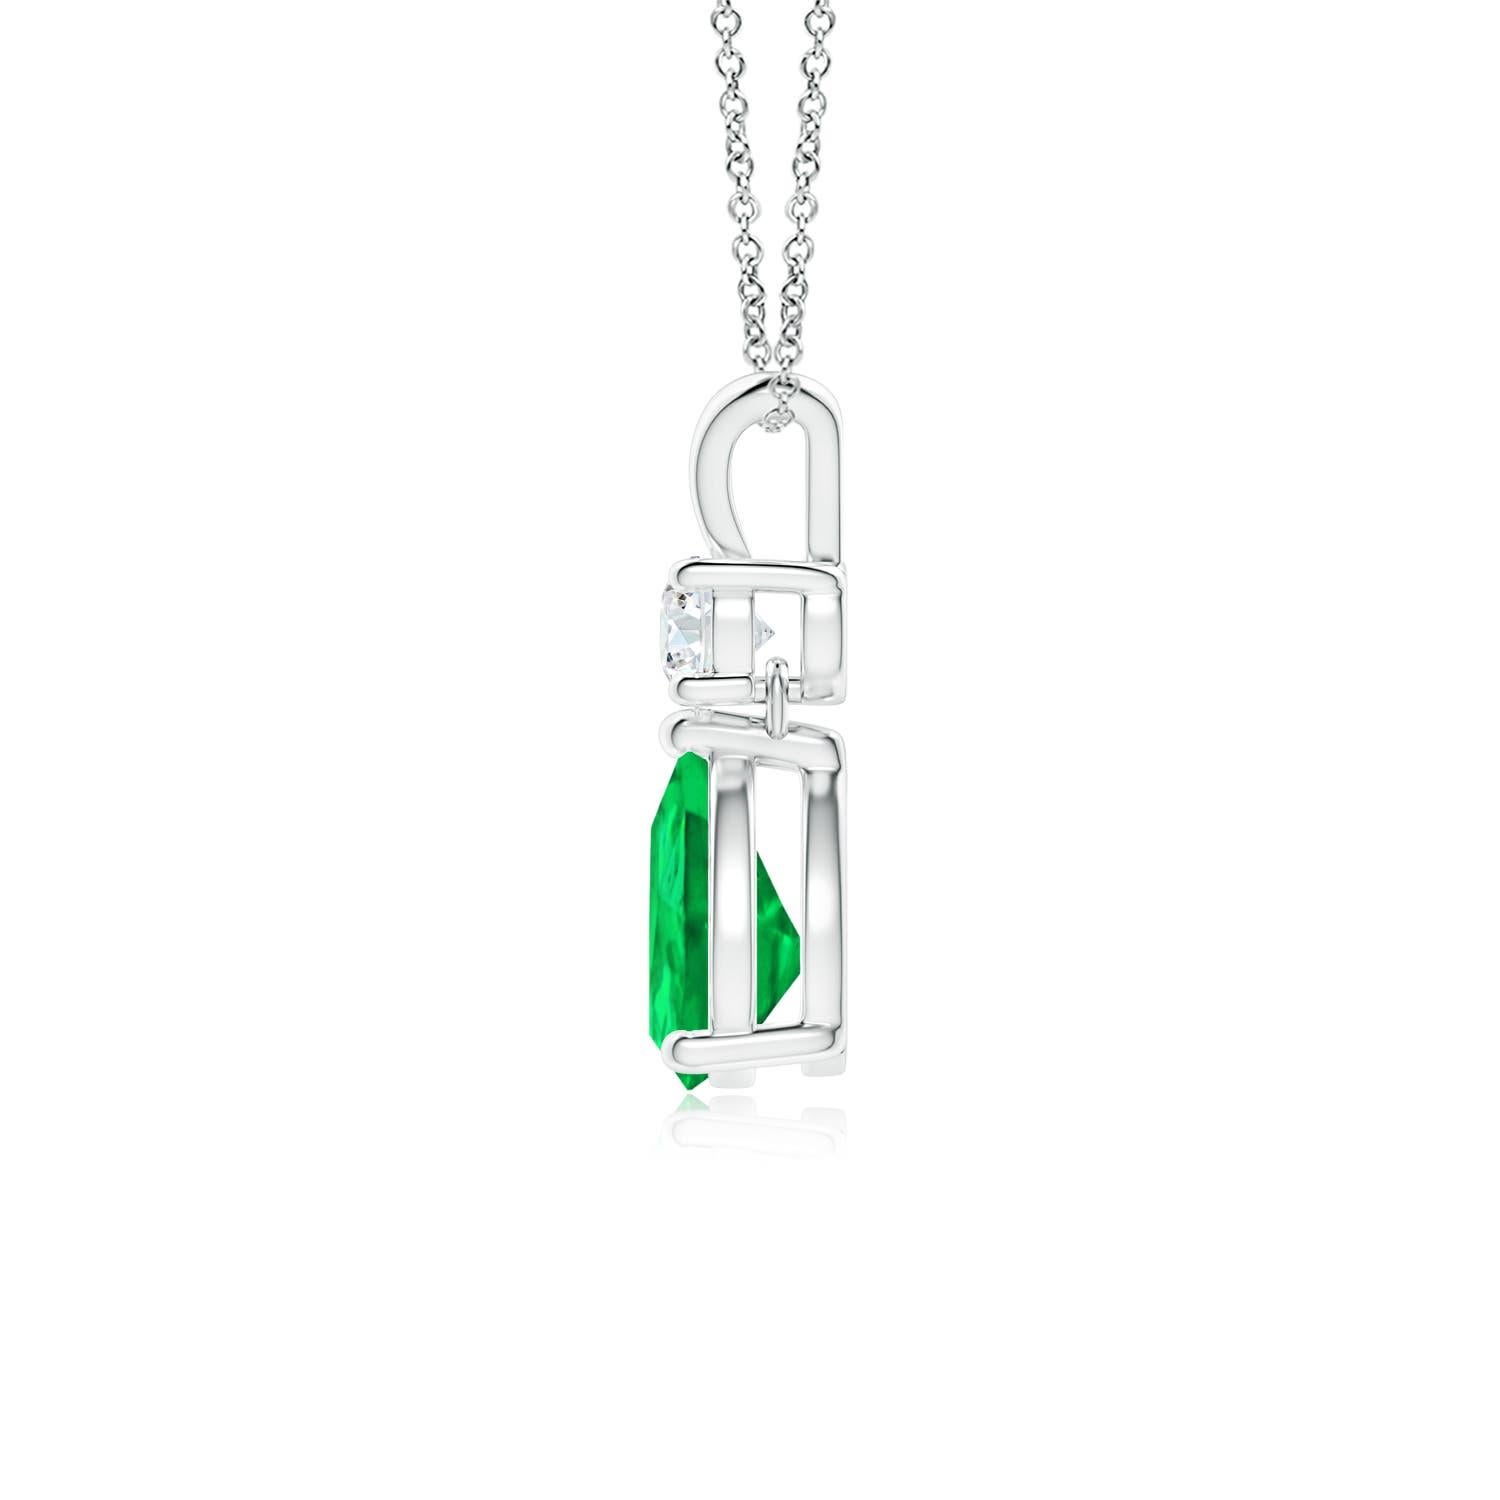 A vivid green pear cut emerald dangles from a sparkling white diamond on this elegant drop pendant. The lustrous V bale adds beauty to this platinum emerald and diamond pendant. It exudes luxurious charm with its remarkable long drop design.
Emerald